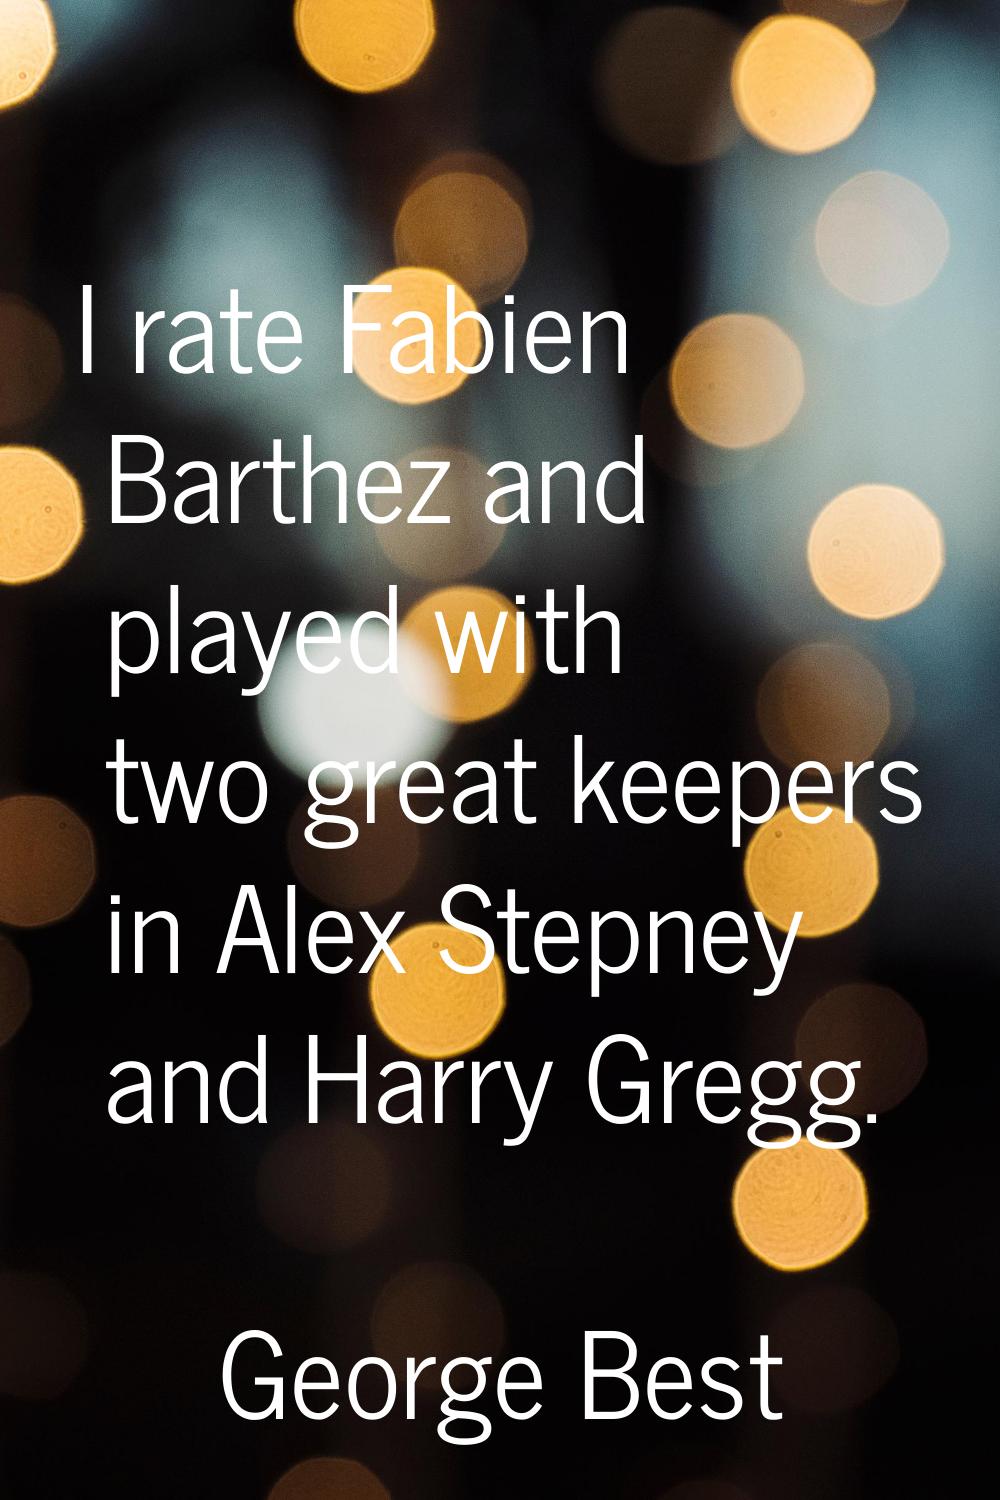 I rate Fabien Barthez and played with two great keepers in Alex Stepney and Harry Gregg.